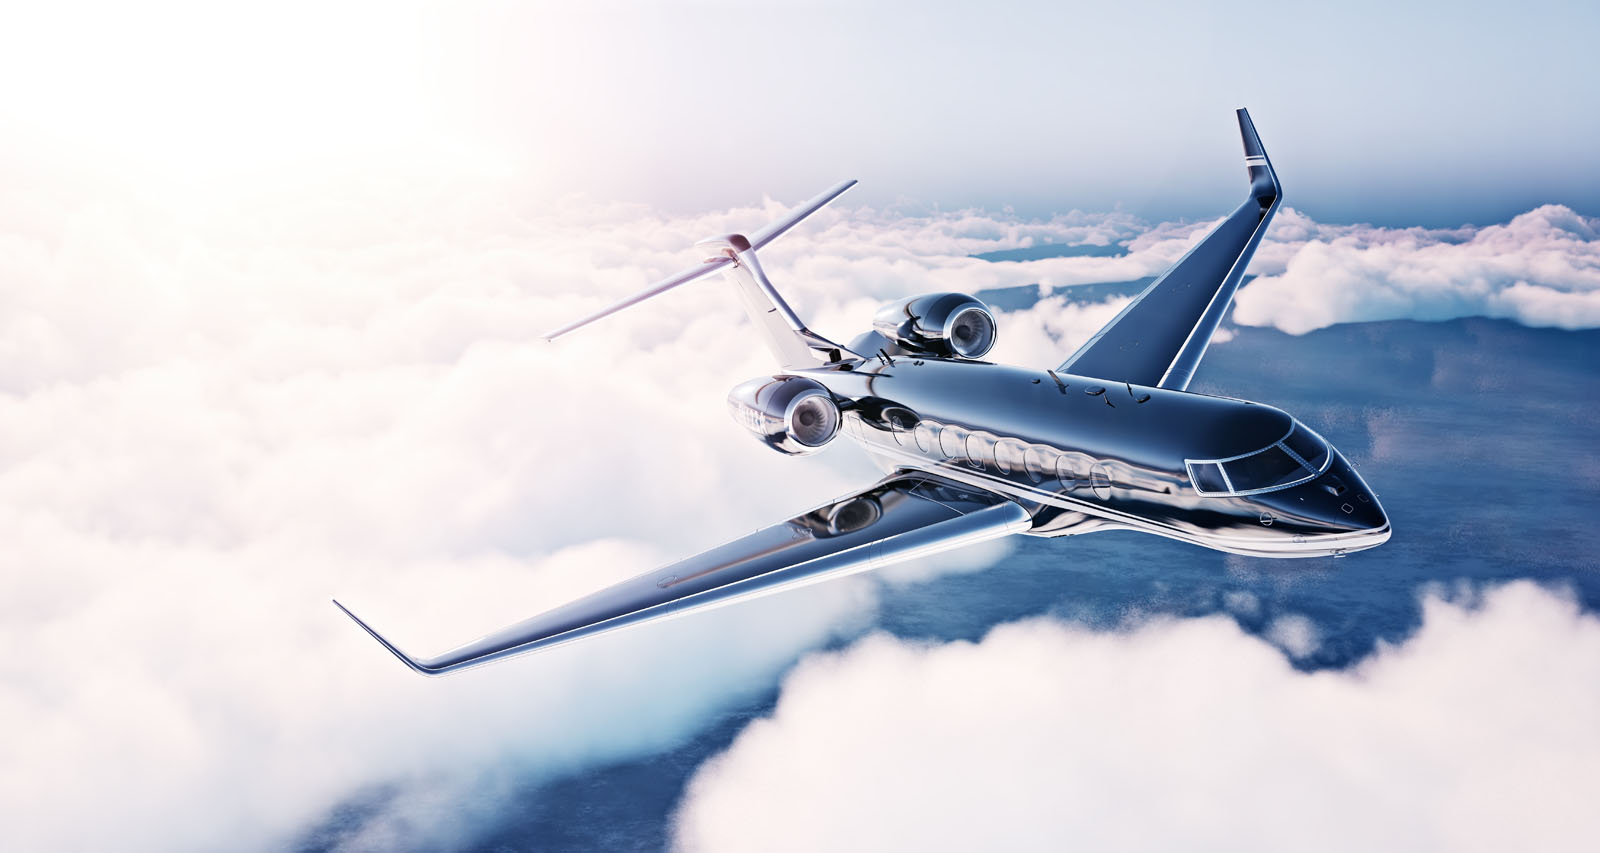 Image,Of,Black,Luxury,Generic,Design,Private,Jet,Flying,In